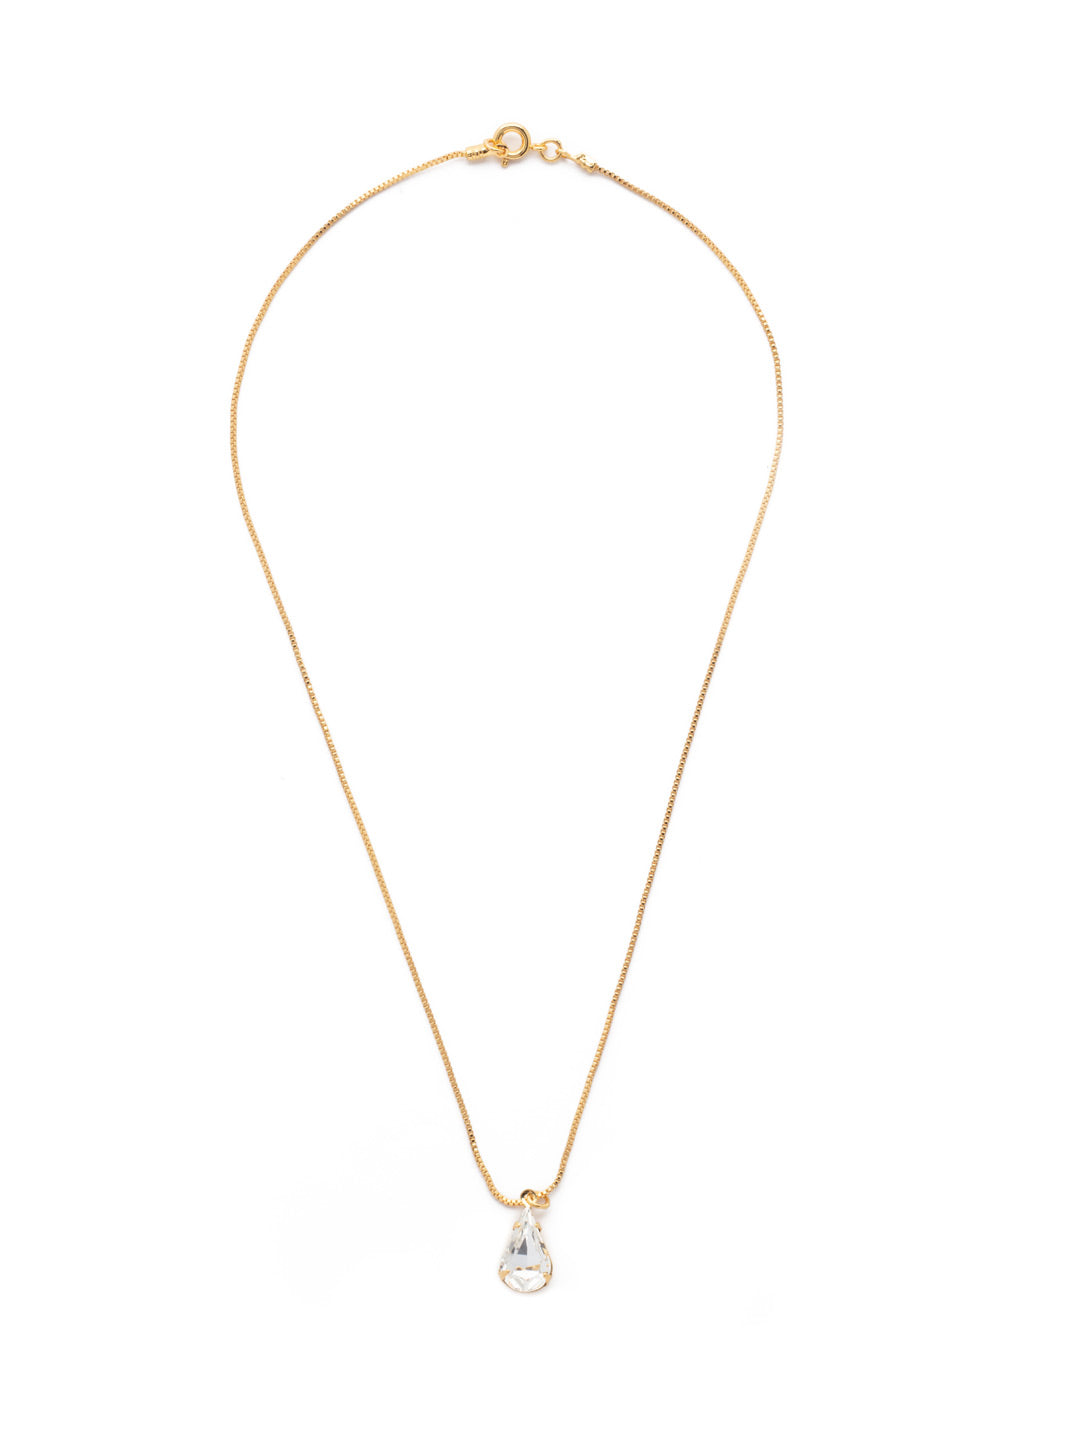 Dana Pendant Necklace - NEV100BGCRY - <p>The Dana Pendant Necklace features a single pear-shaped crystal on a dainty chain, secured with a spring ring clasp. From Sorrelli's Crystal collection in our Bright Gold-tone finish.</p>